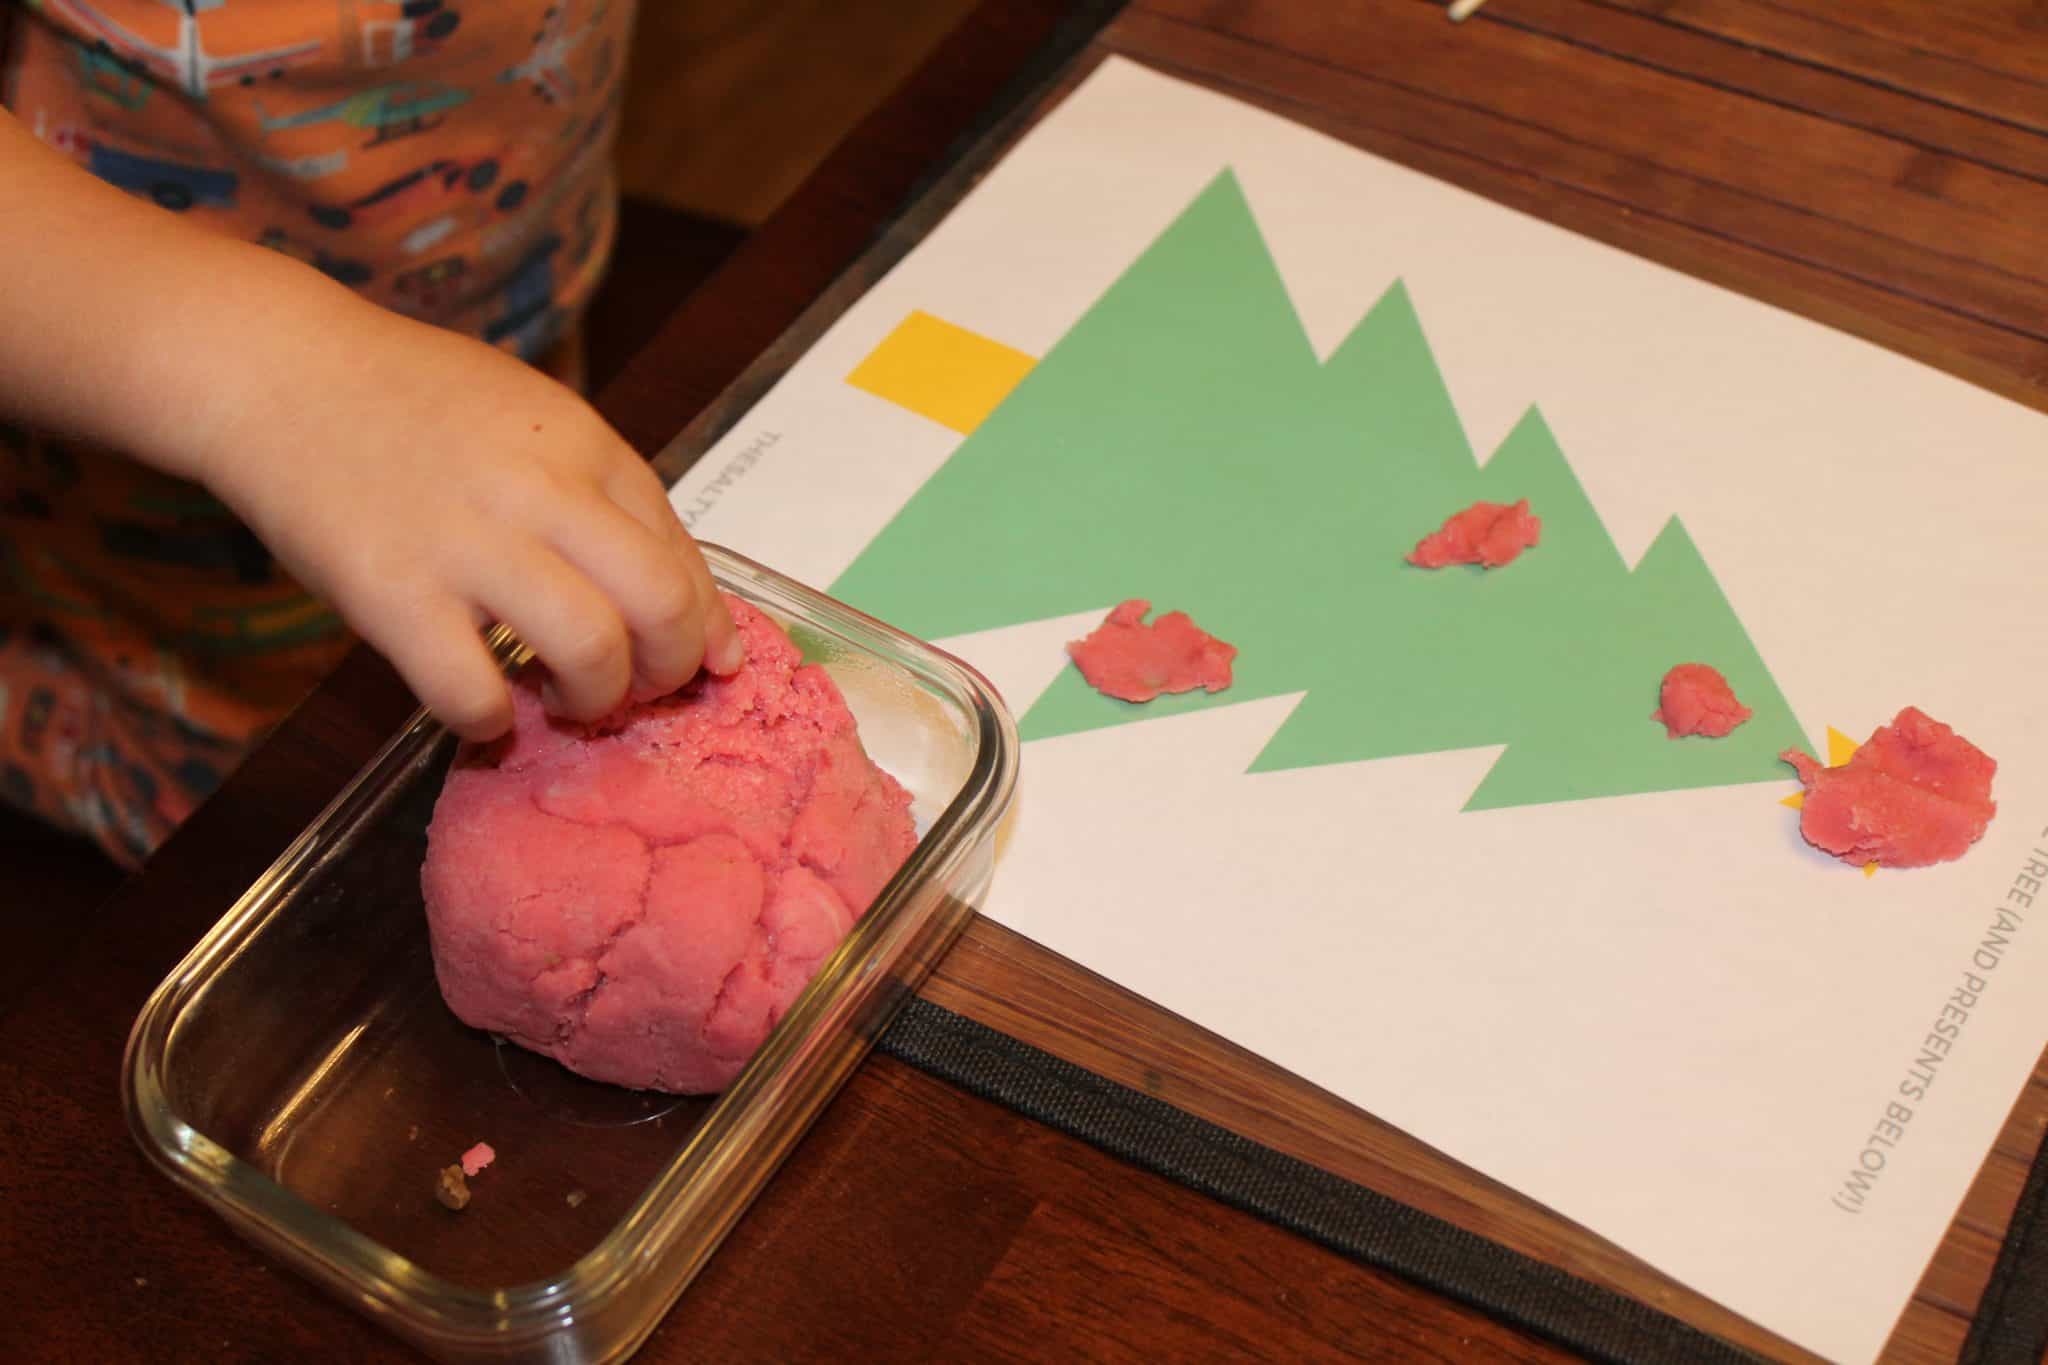 We've got a fresh take on holiday playdough activities for toddlers! From Christmas playdough to a homemade Gingerbread playdough recipe, and from Hannukah playdough mats to a pretend play center, we've got your holiday sensory play covered. Find the full list of activities at TheSaltyMamas.com. #holidays #christmas #toddleractivities #hannukahactivitiesforkids #christmasactivitiesforkids #christmasplaydough #gingerbreadplaydough #peppermintplaydough #playdoughcenters